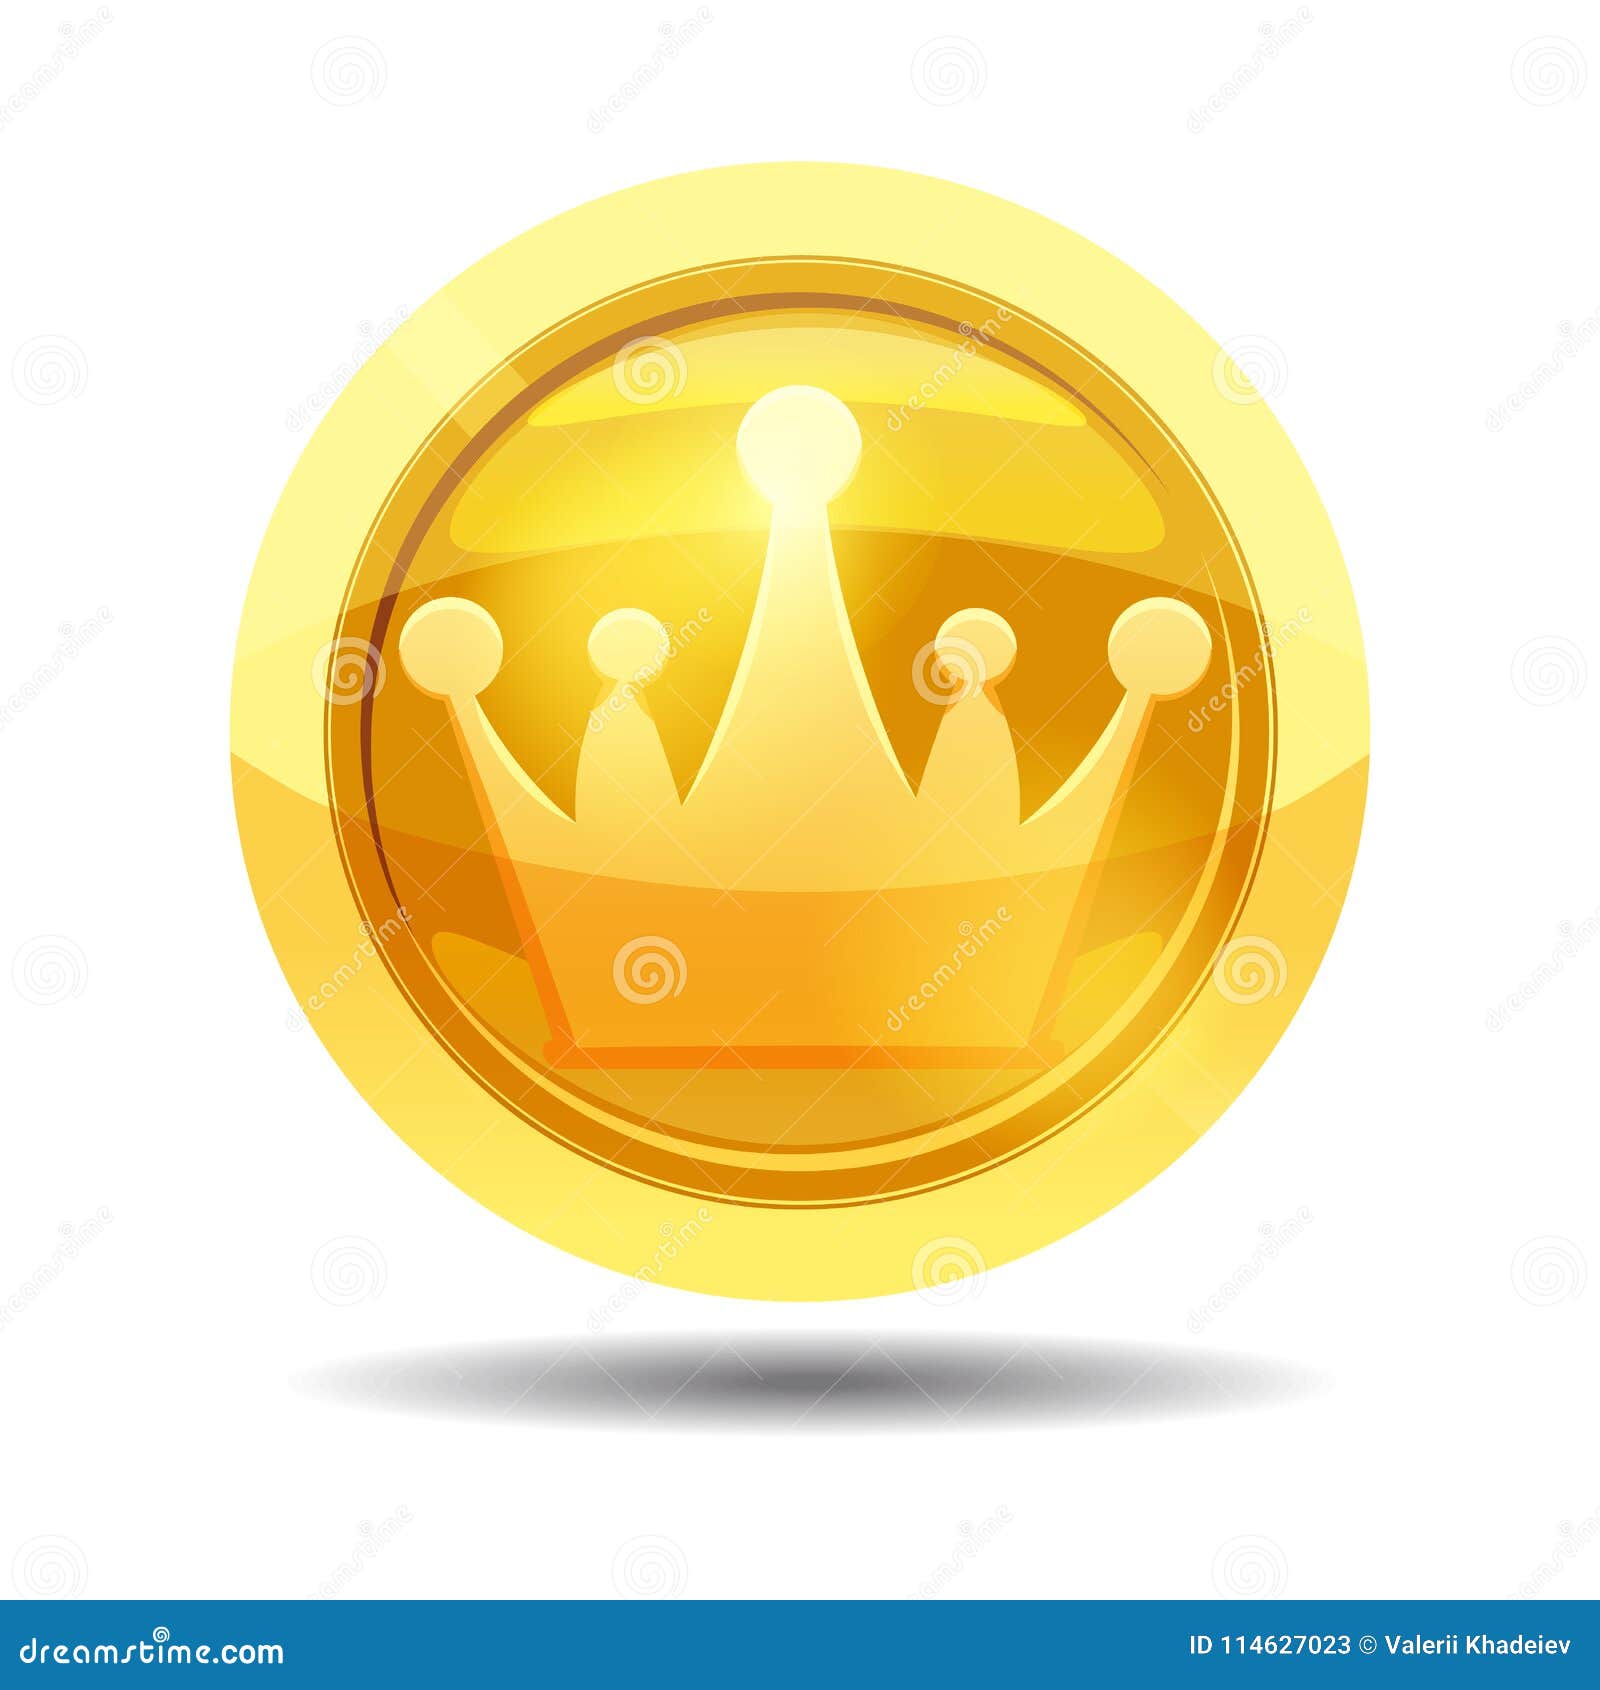 Game Coin With Crown, Game Interface, Gold, Vector ...